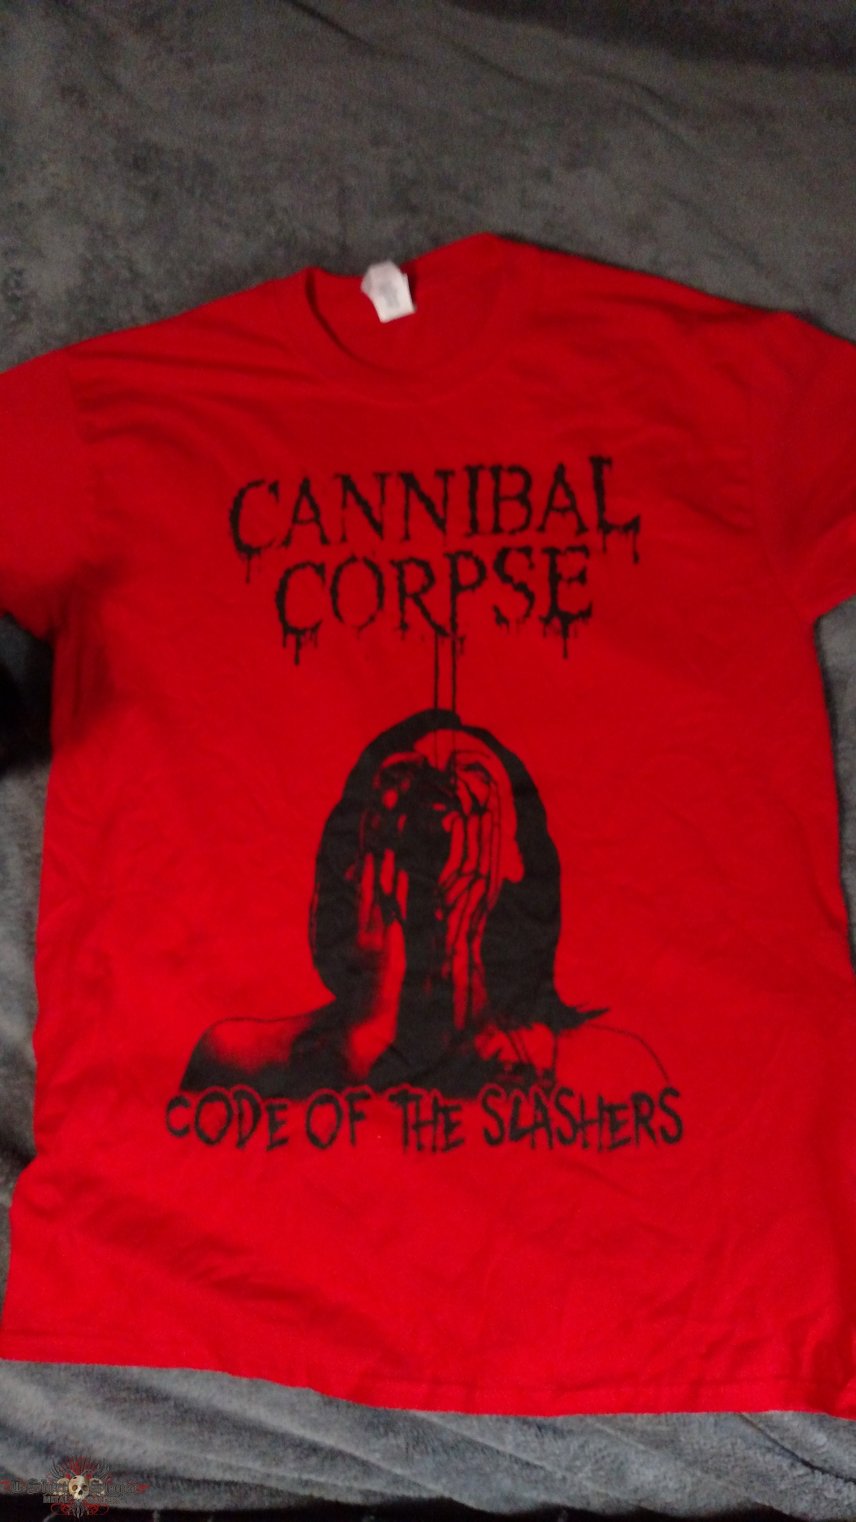 Cannibal Corpse - Code of The Slashers [T-Shirt]